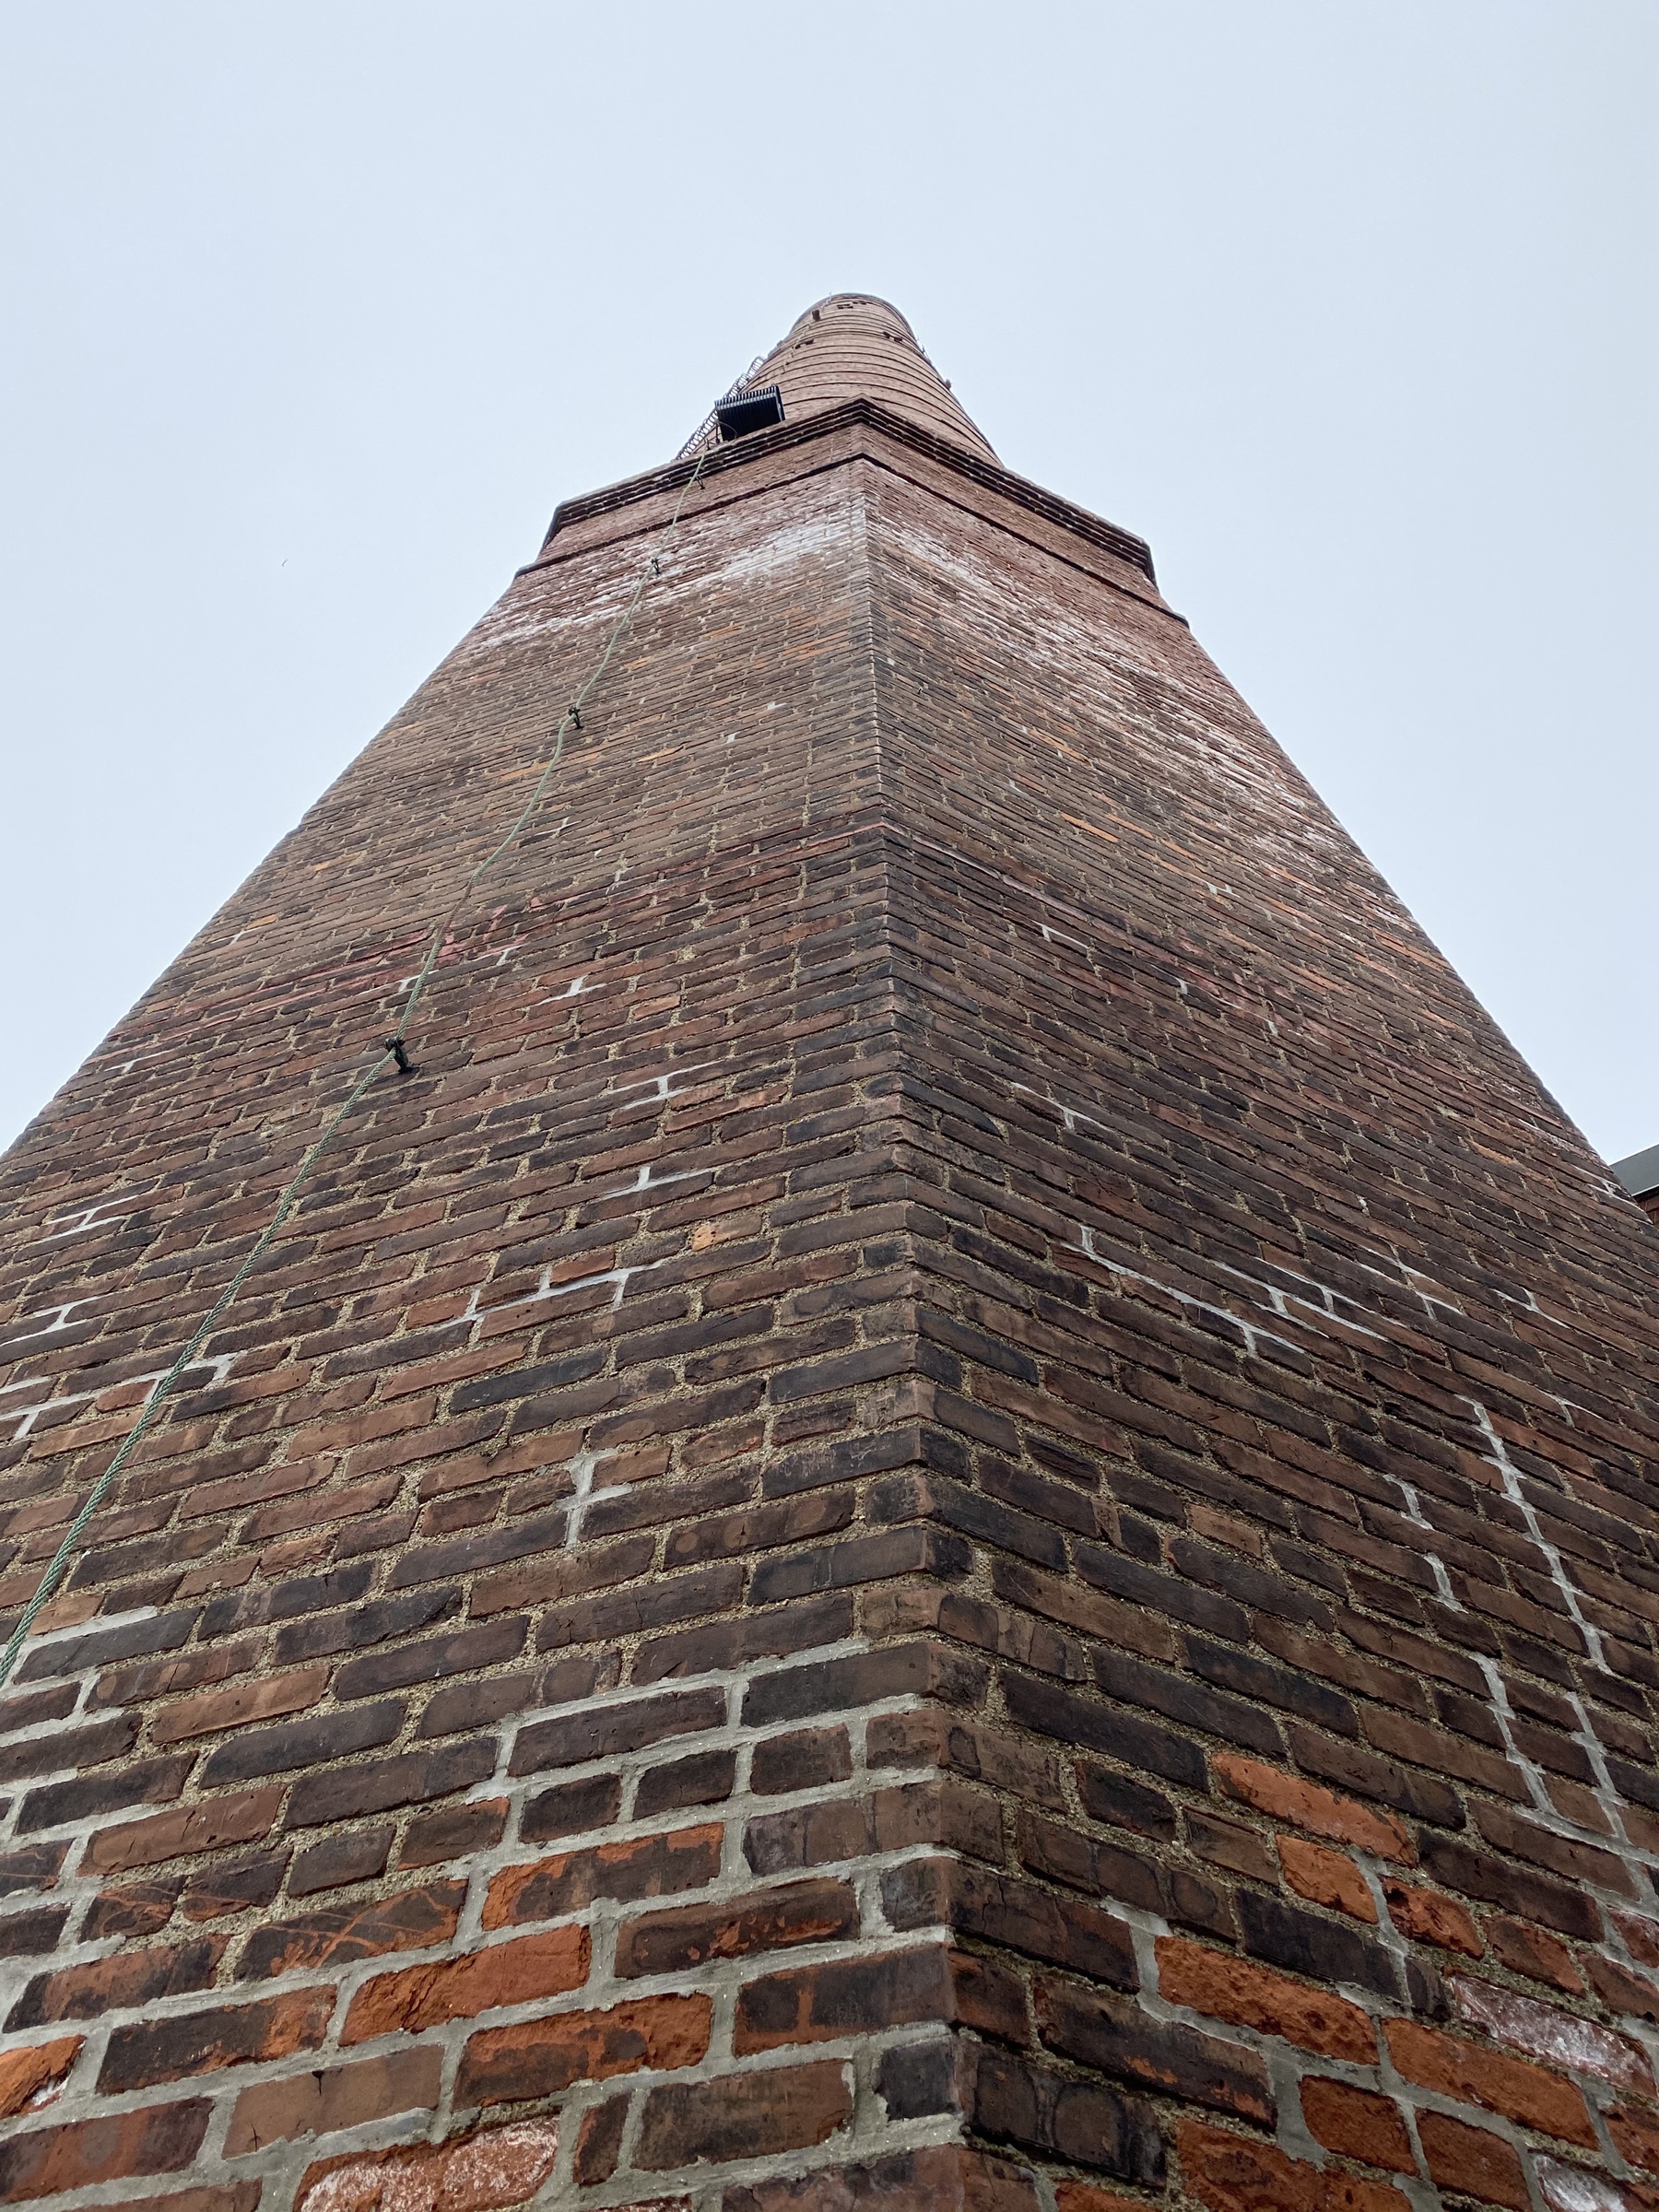 View of a tall brick chimney from immediately below.